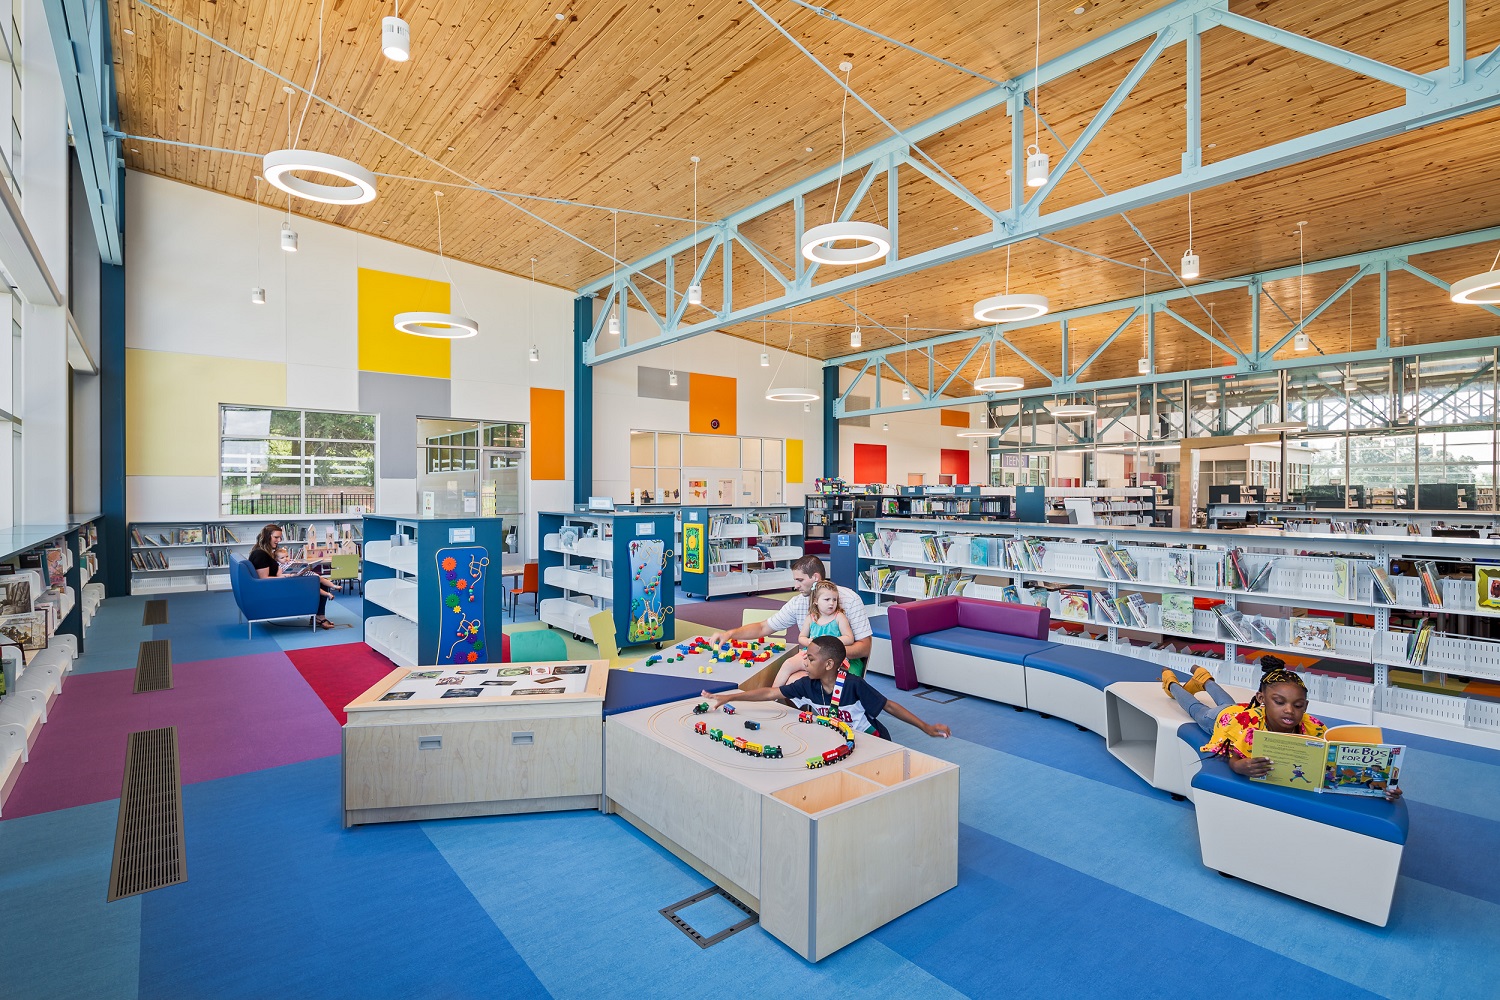 Greenville County Library, Five Forks Branch by Margaret Sullivan Studio in collaboration with McMillan Pazdan Smith Architecture. Image by: Firewater Photography